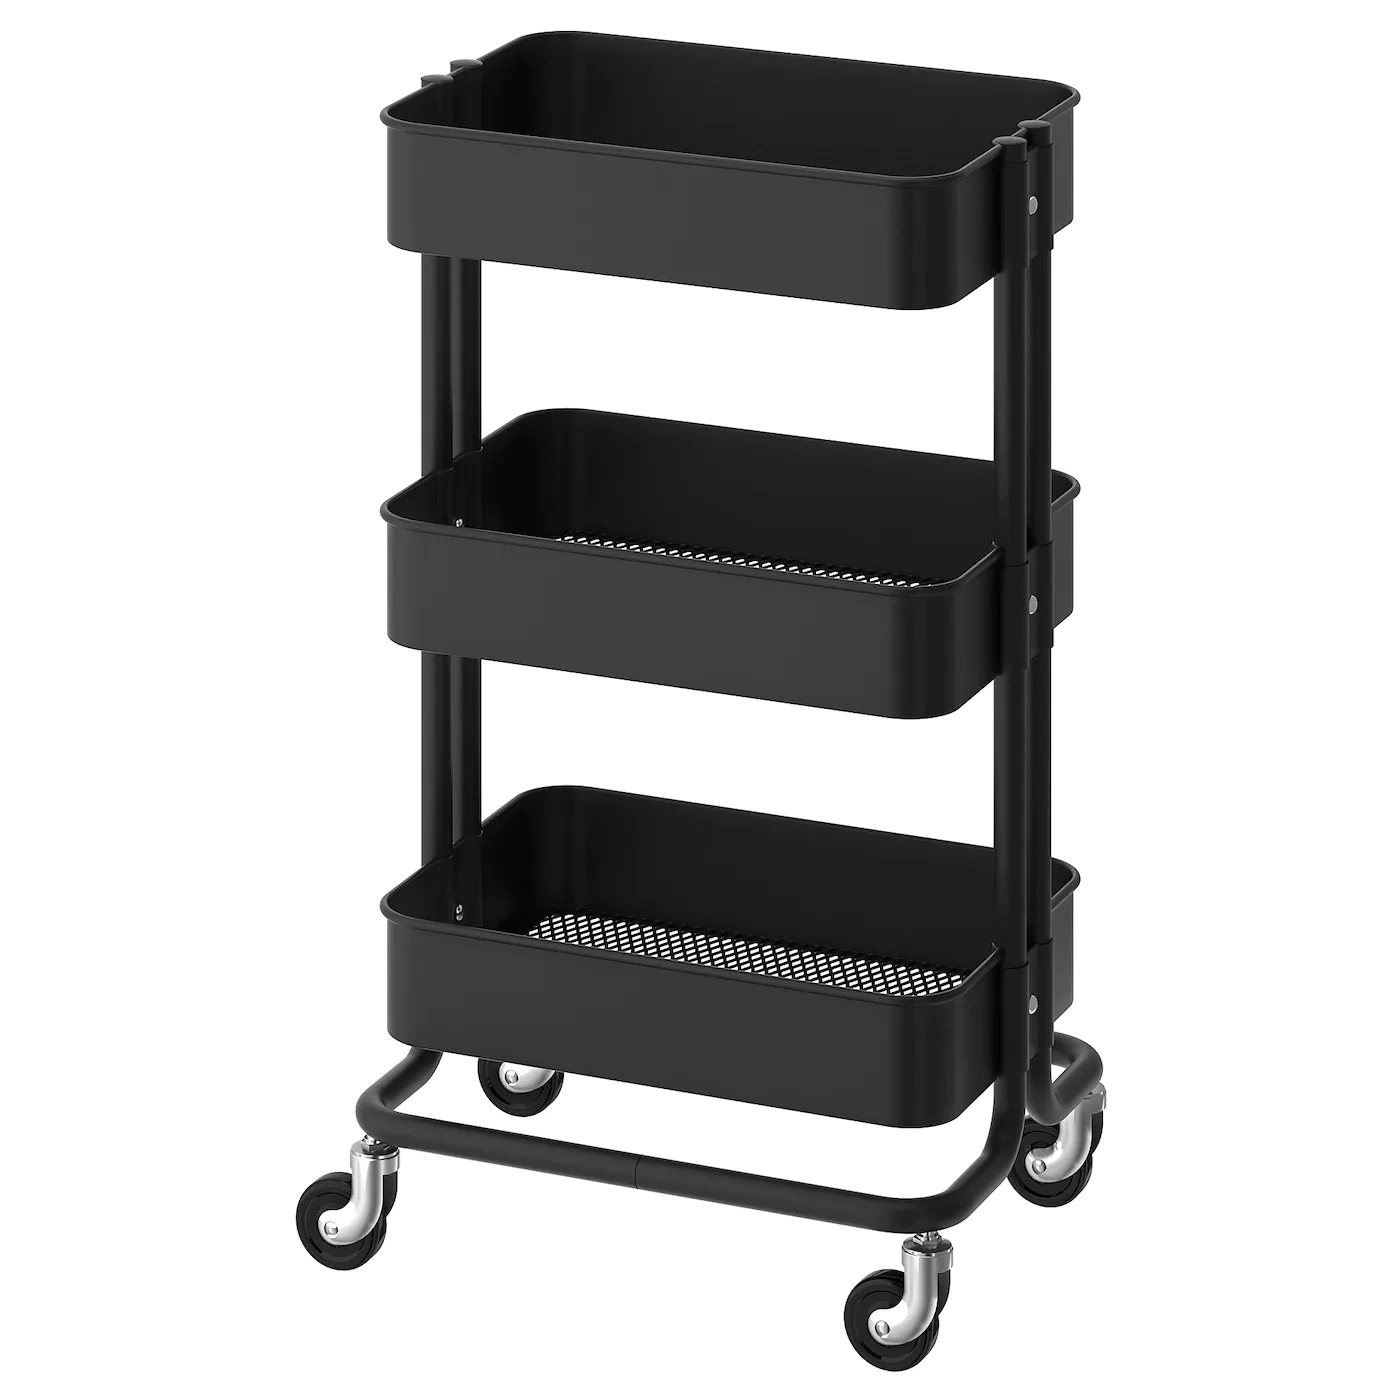 Three-Tier metal furniture cart is suitable for kitchen use